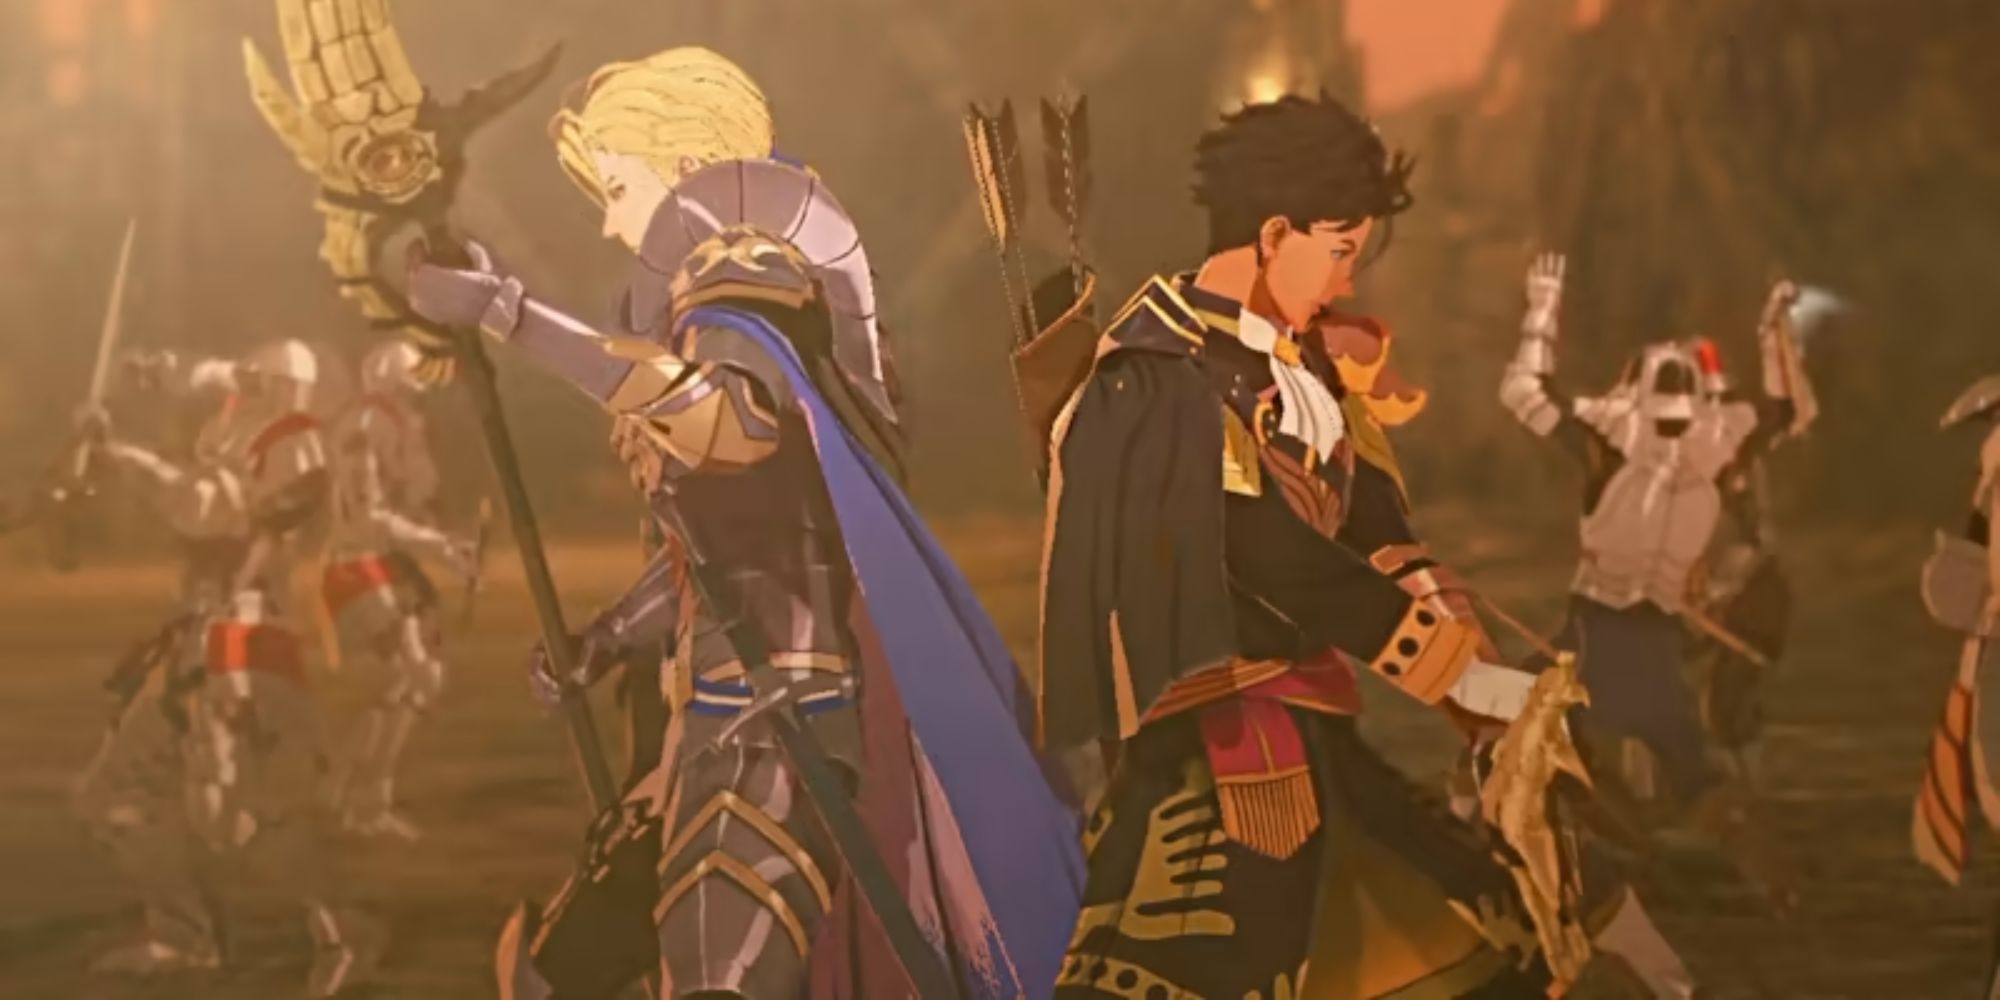 Claude and Dimitri fight on the battlefield together in Fire Emblem Warriors: Three Hopes.